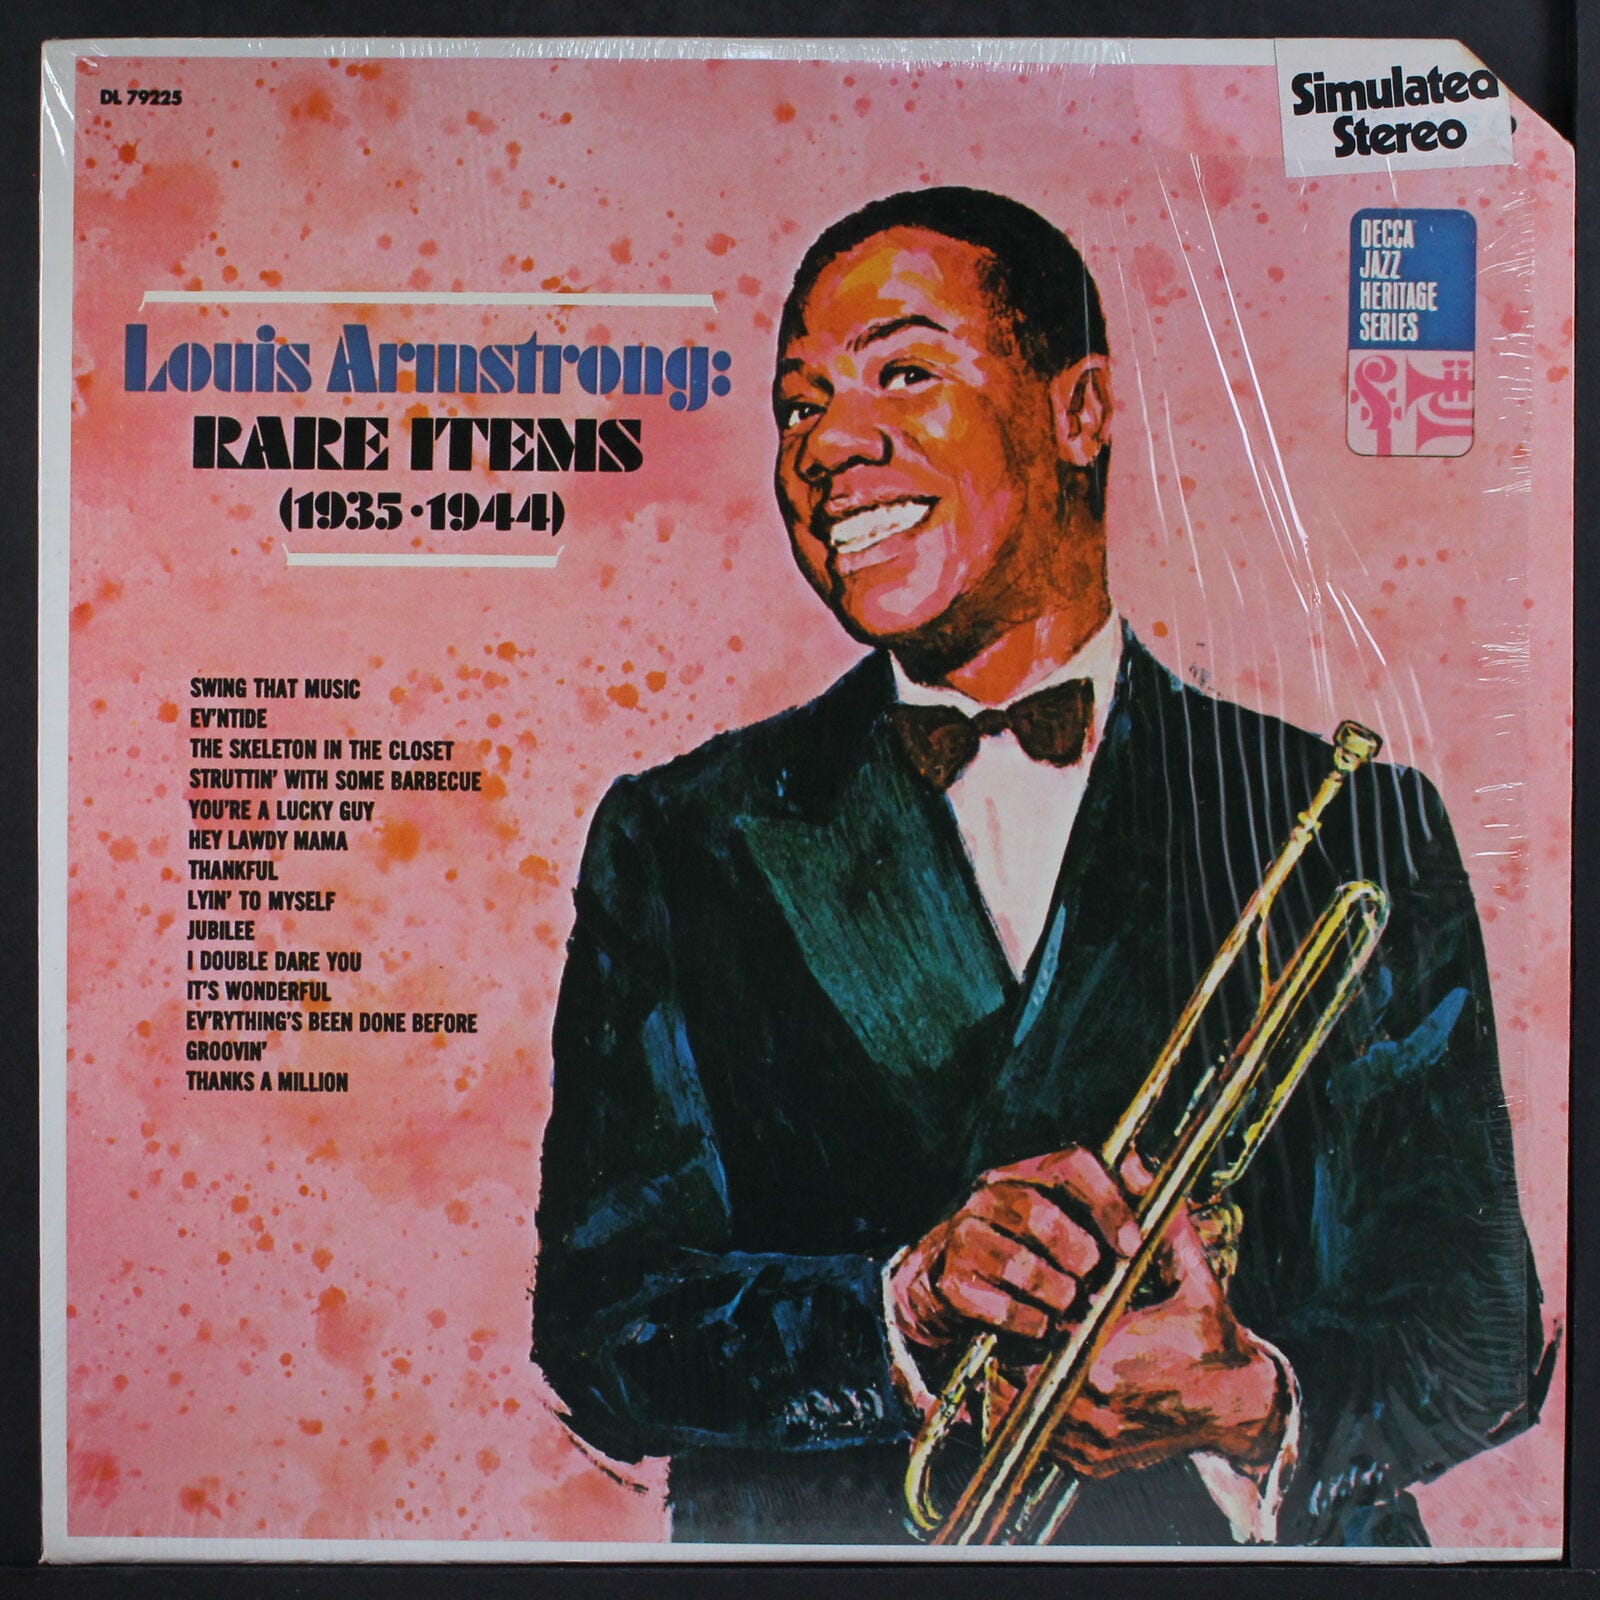 Louis Armstrong Back in New York 1935 Vintage Vinyl Record 